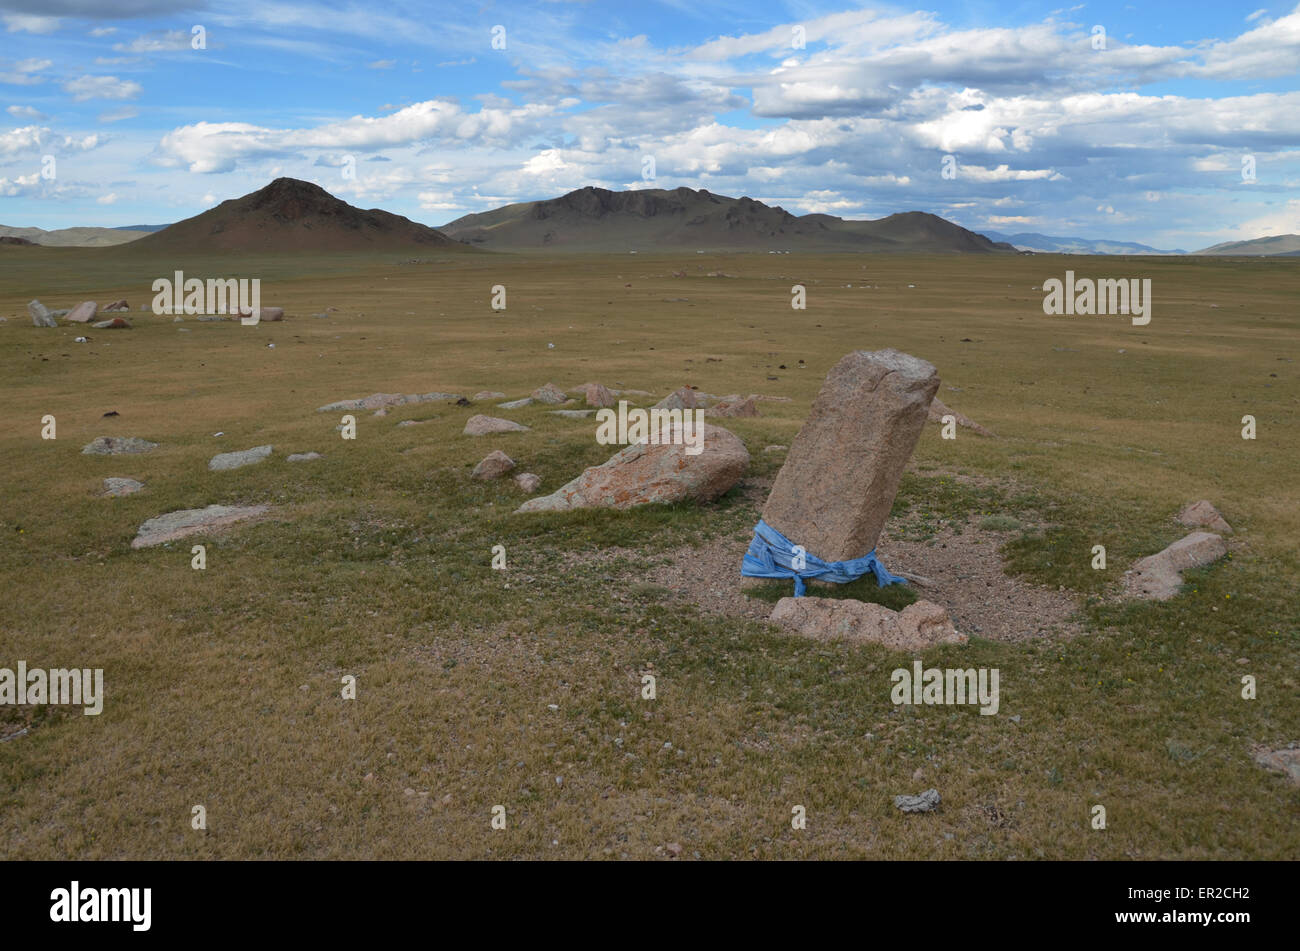 A deer stone in the Arhangay province, central Mongolia Stock Photo